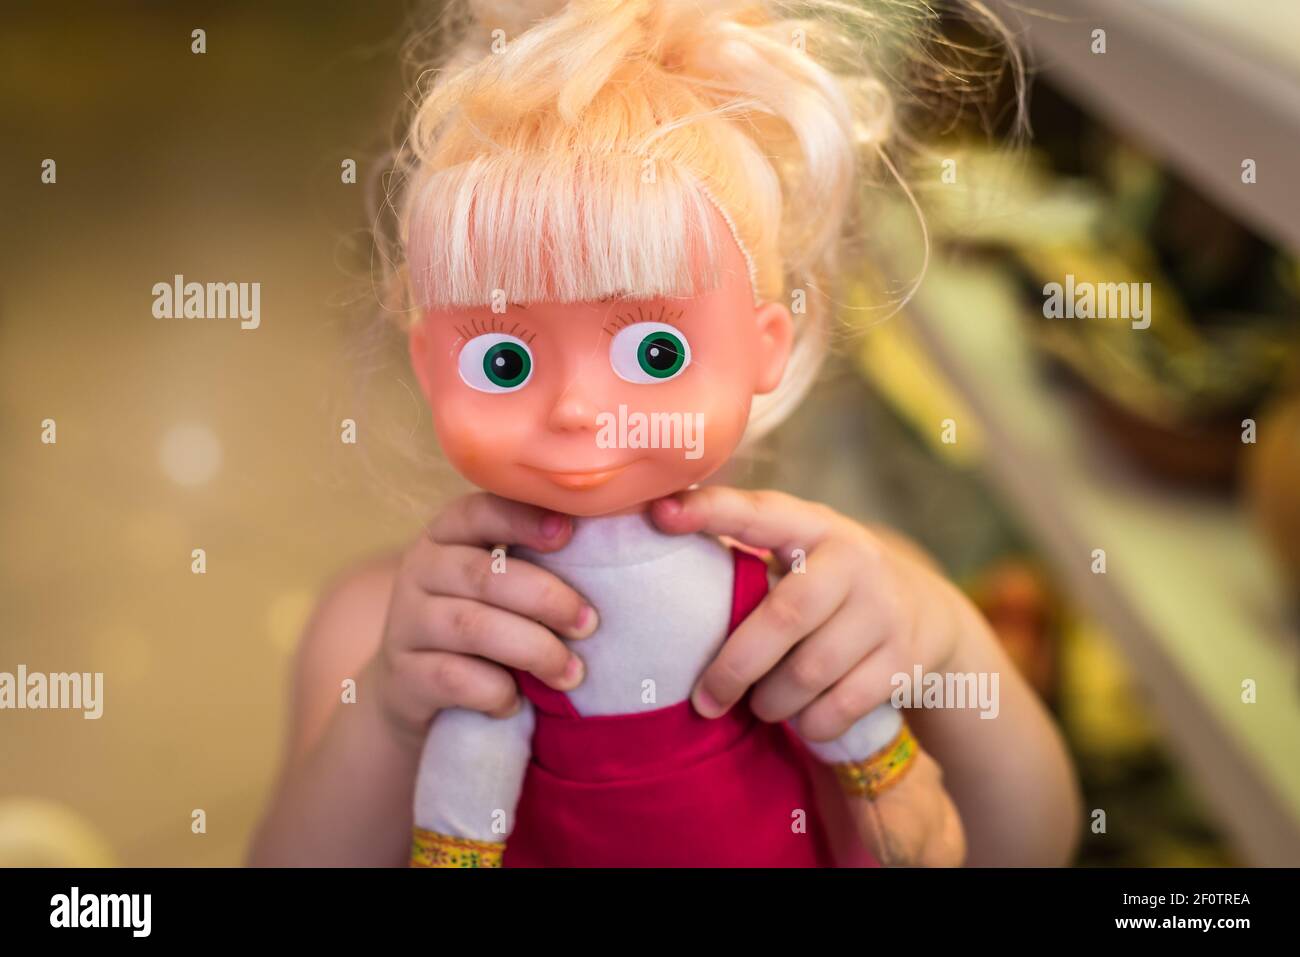 Baby hands hold the doll Stock Photo